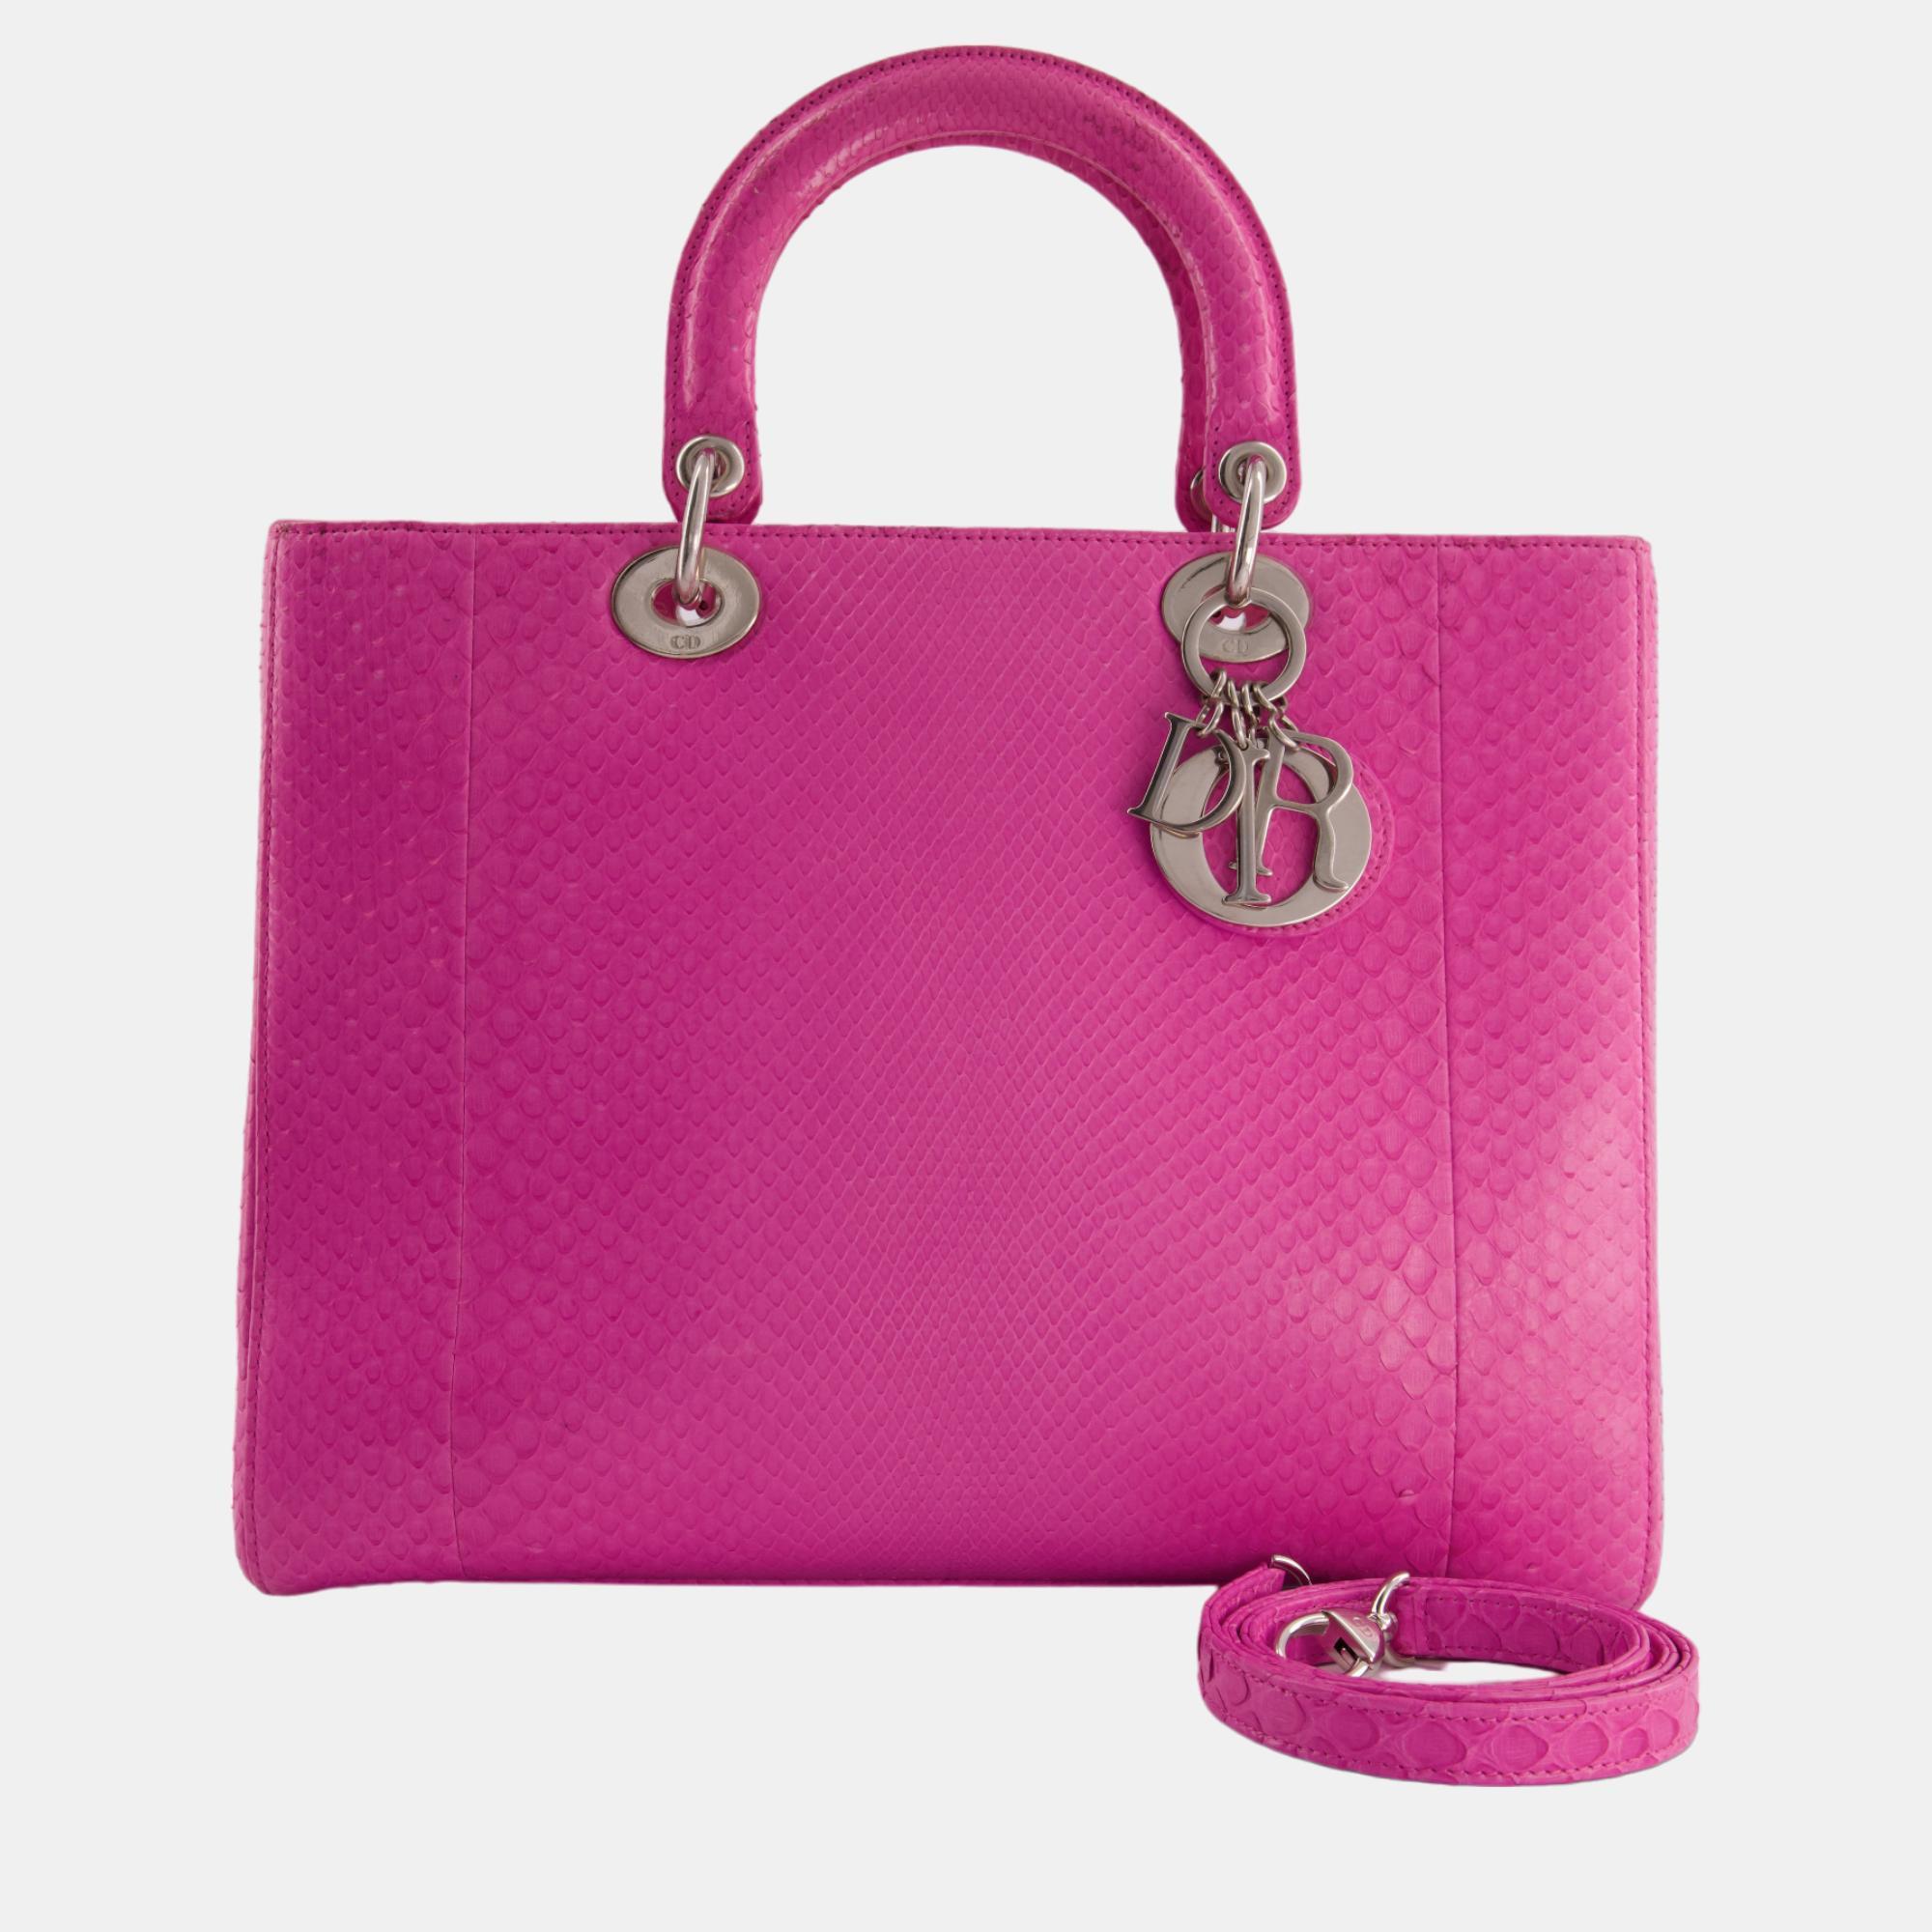 Christian Dior Large Pink Python Lady Dior Bag With Silver Hardware